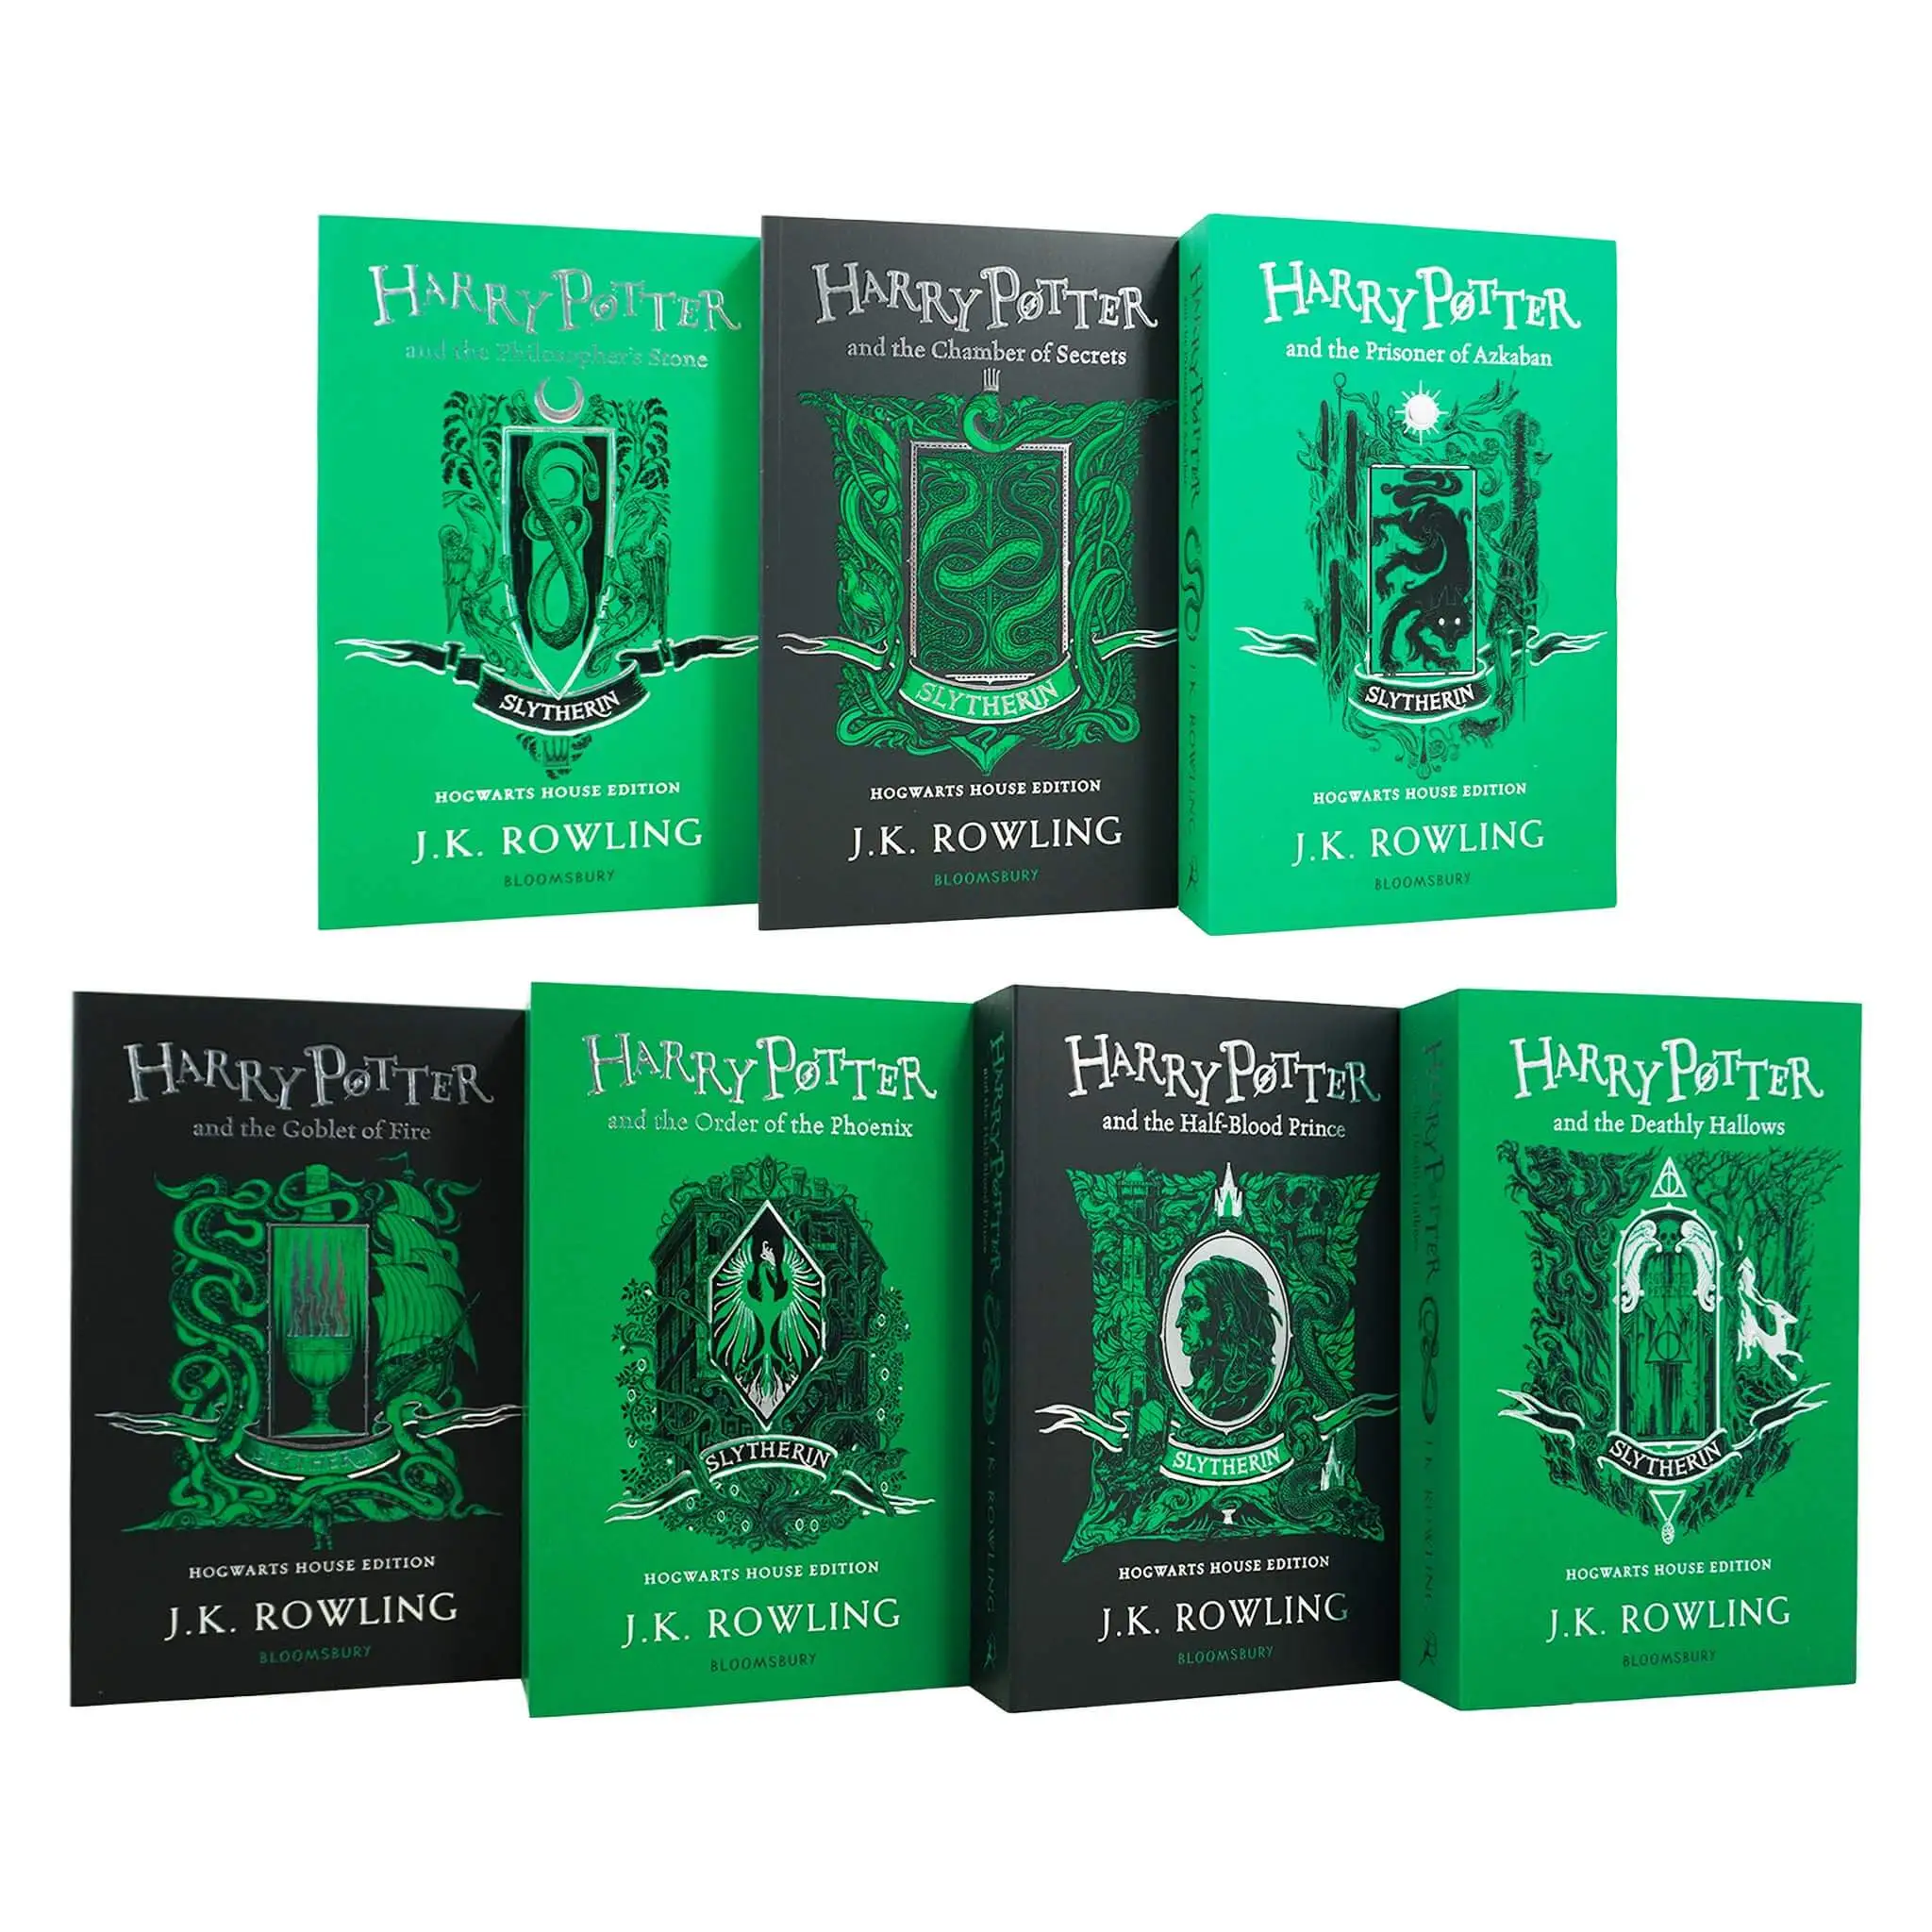 Harry Potter: Hogwarts House Editions - Slytherin 7 Books Box Set by J.K. Rowling - Ages 9+ - Paperback 1